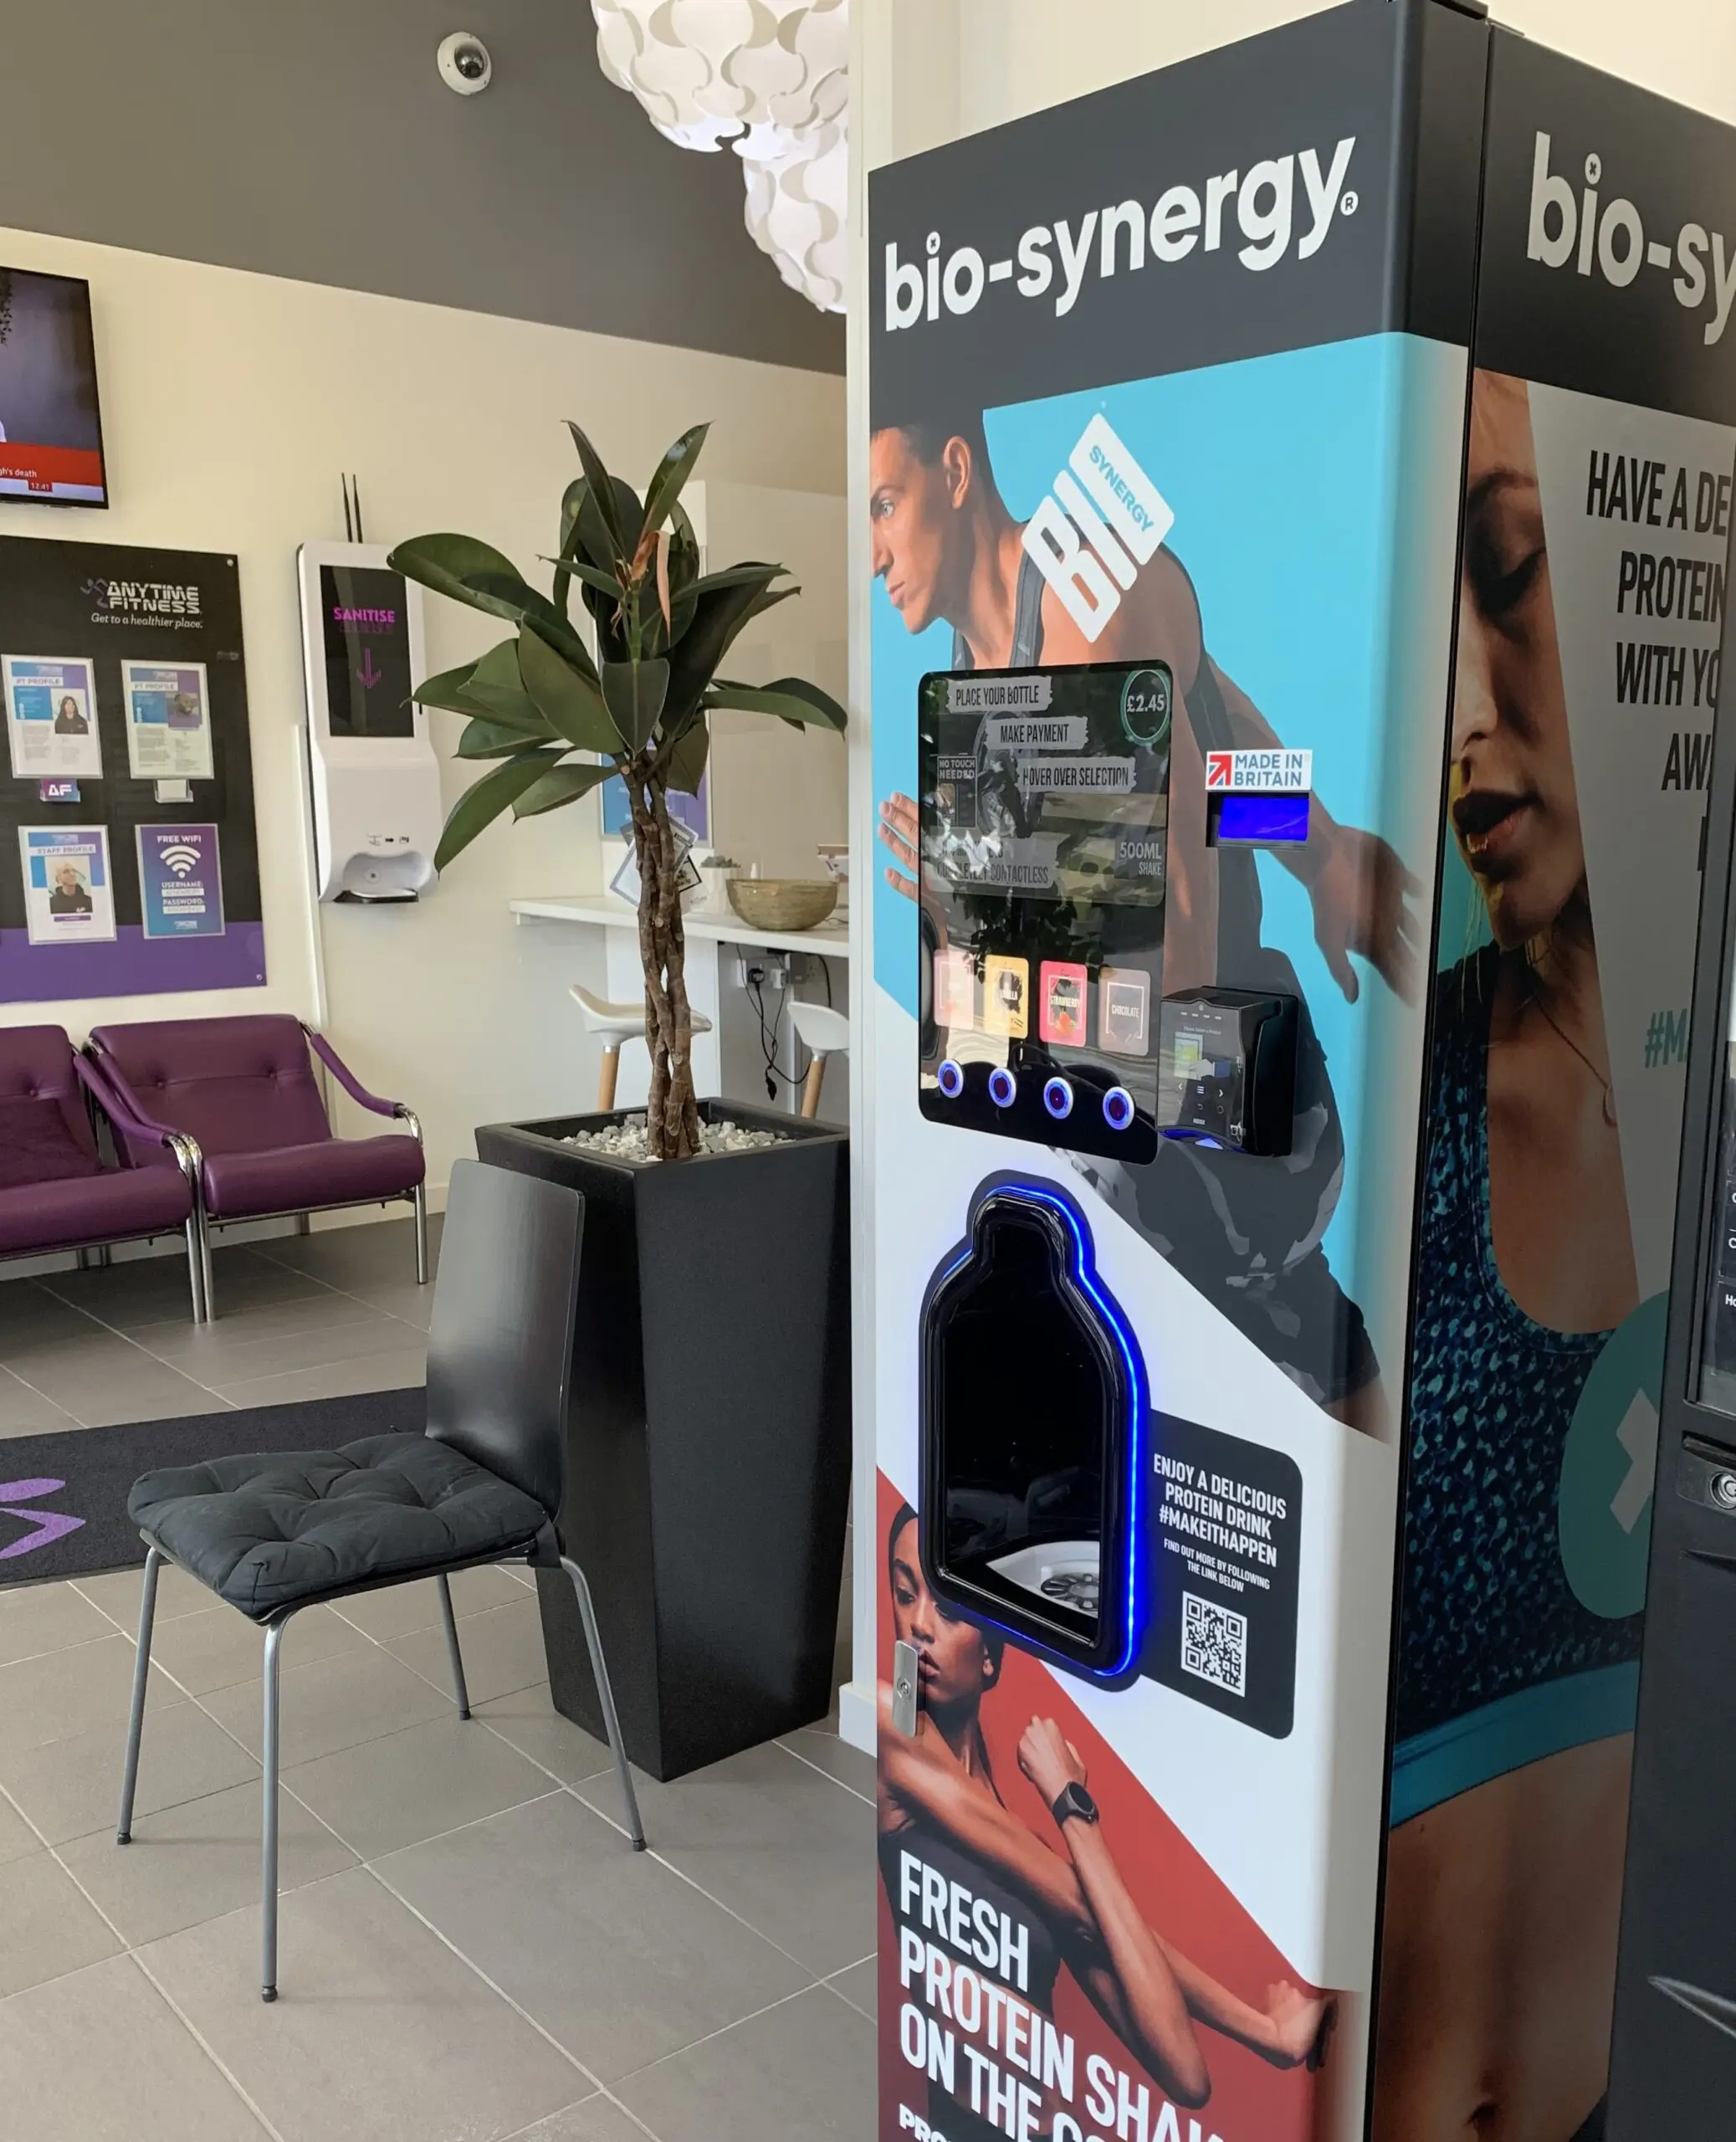 Bio-synergy launches protein shake vending machines at anytime fitness gyms nationwide